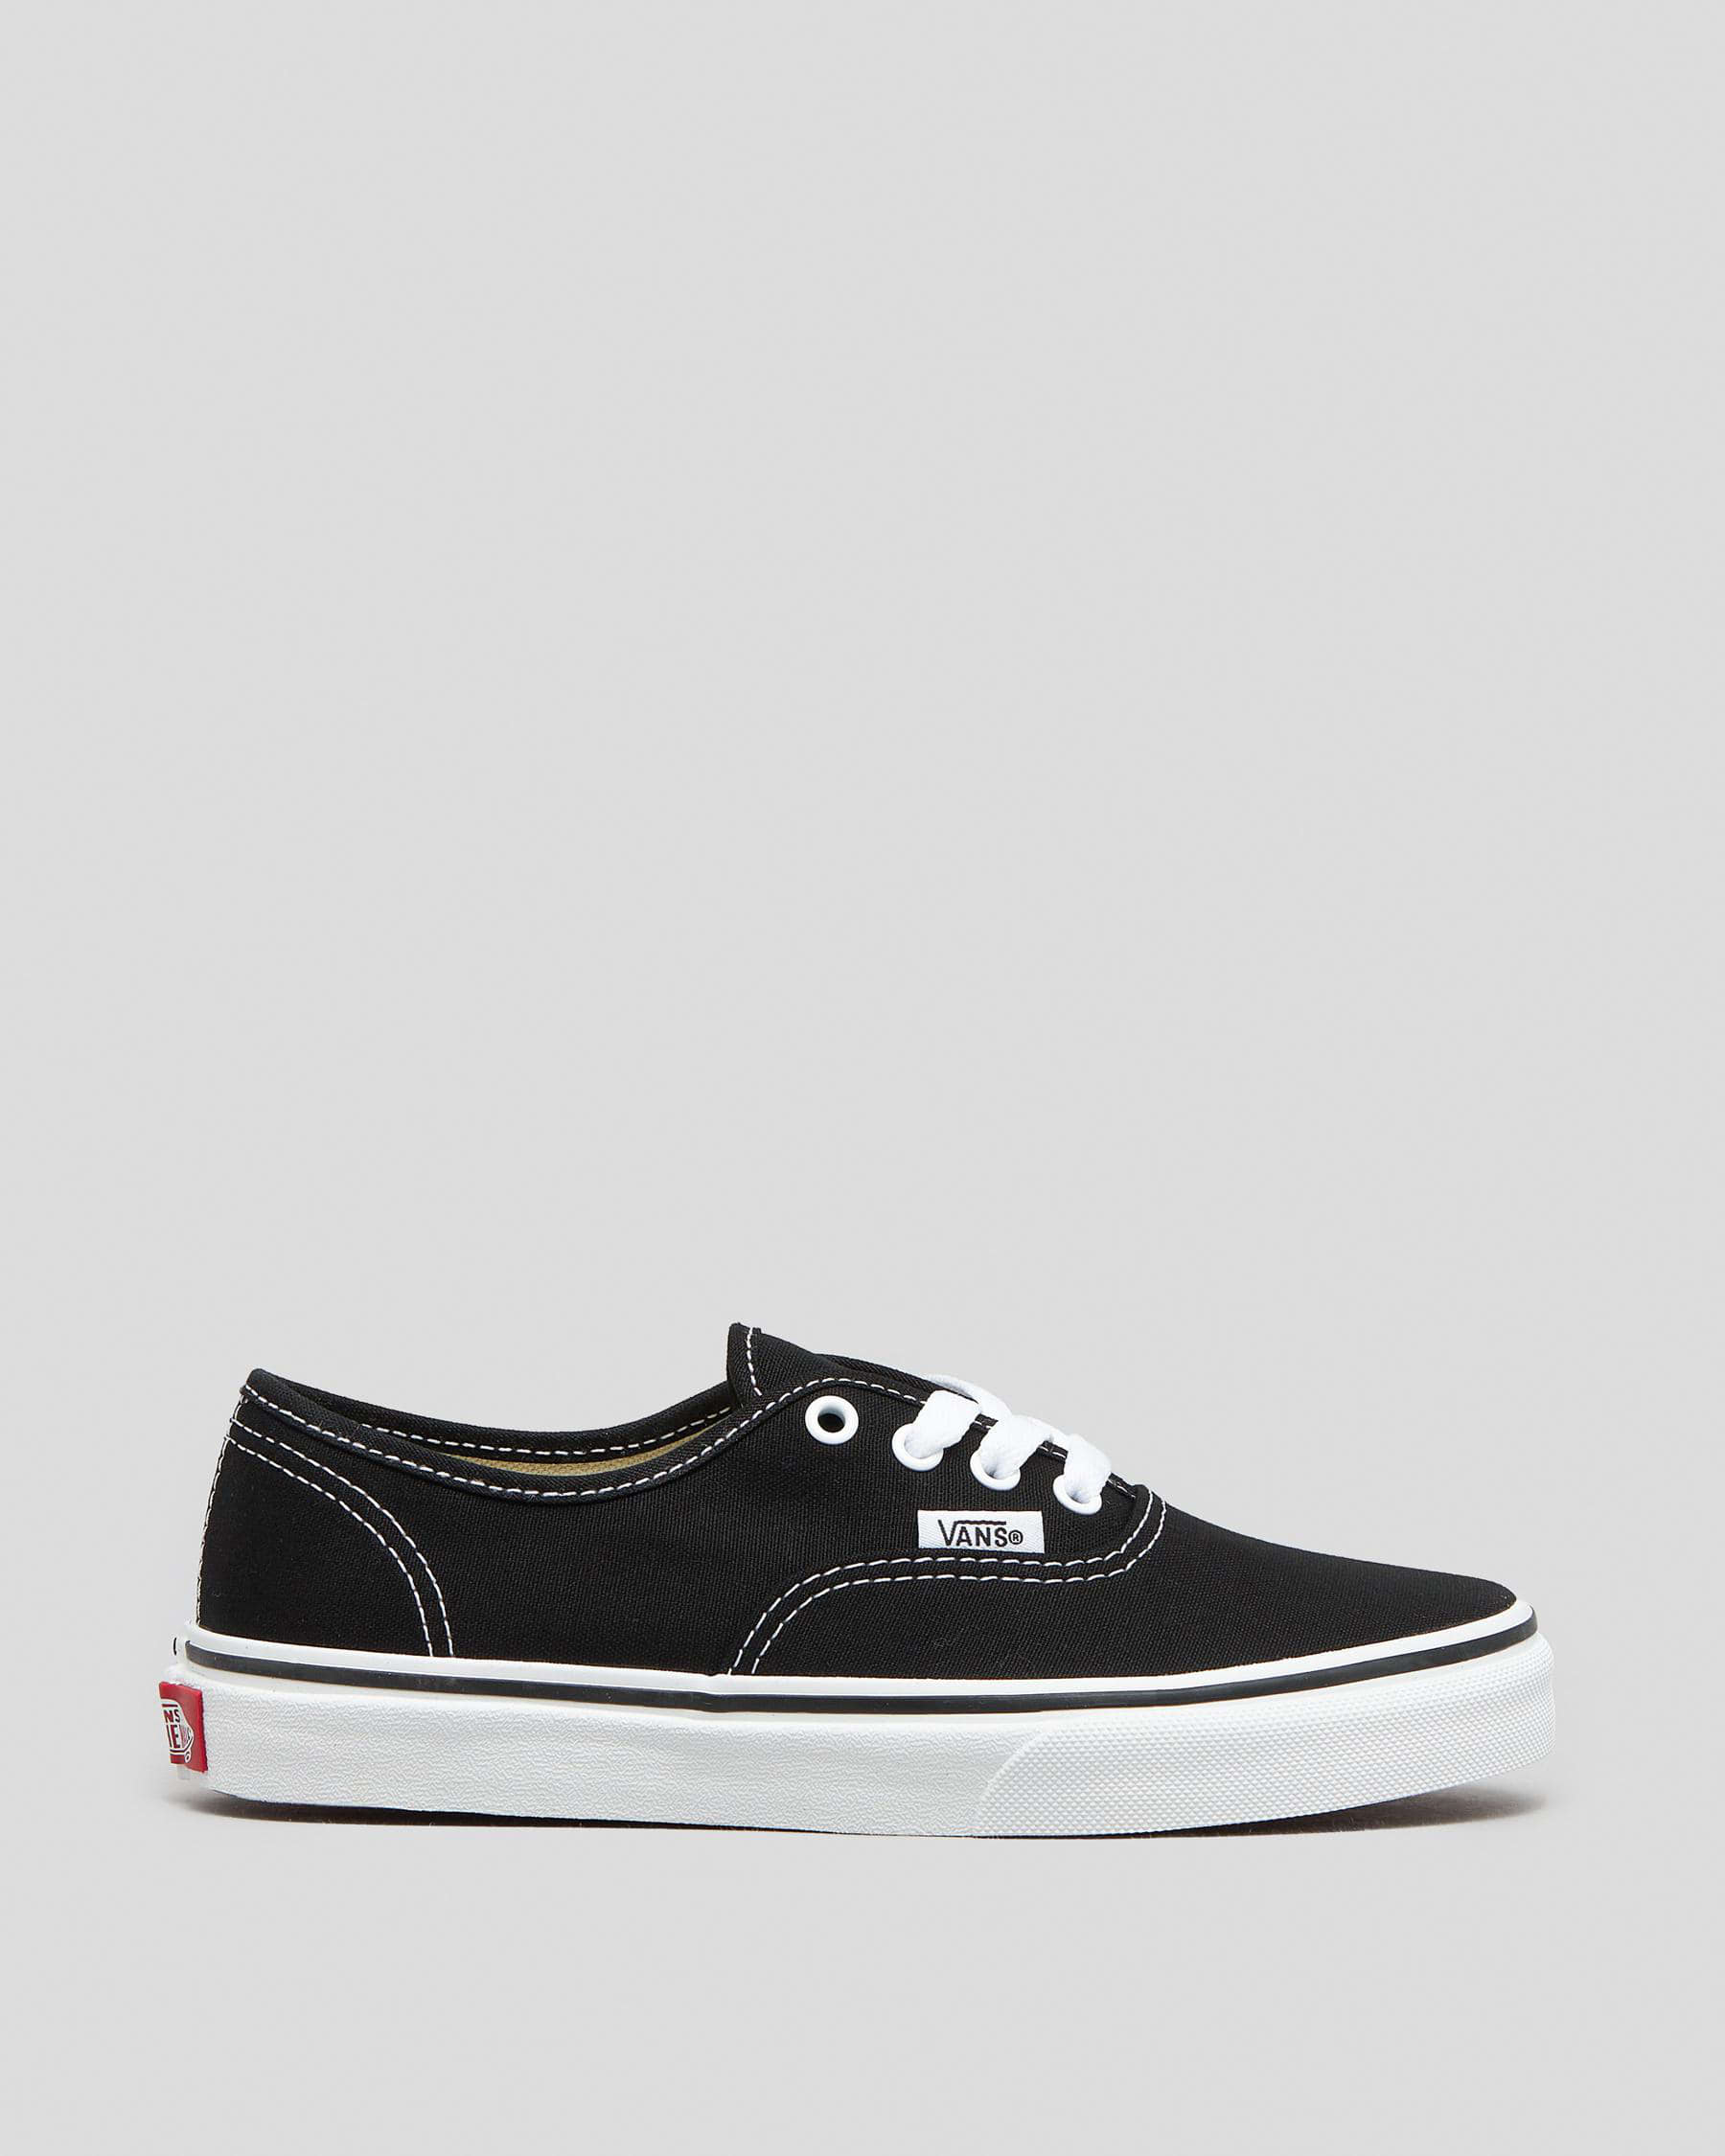 Shop Vans Kids' Authentic Shoes In Black/white - Fast Shipping & Easy ...